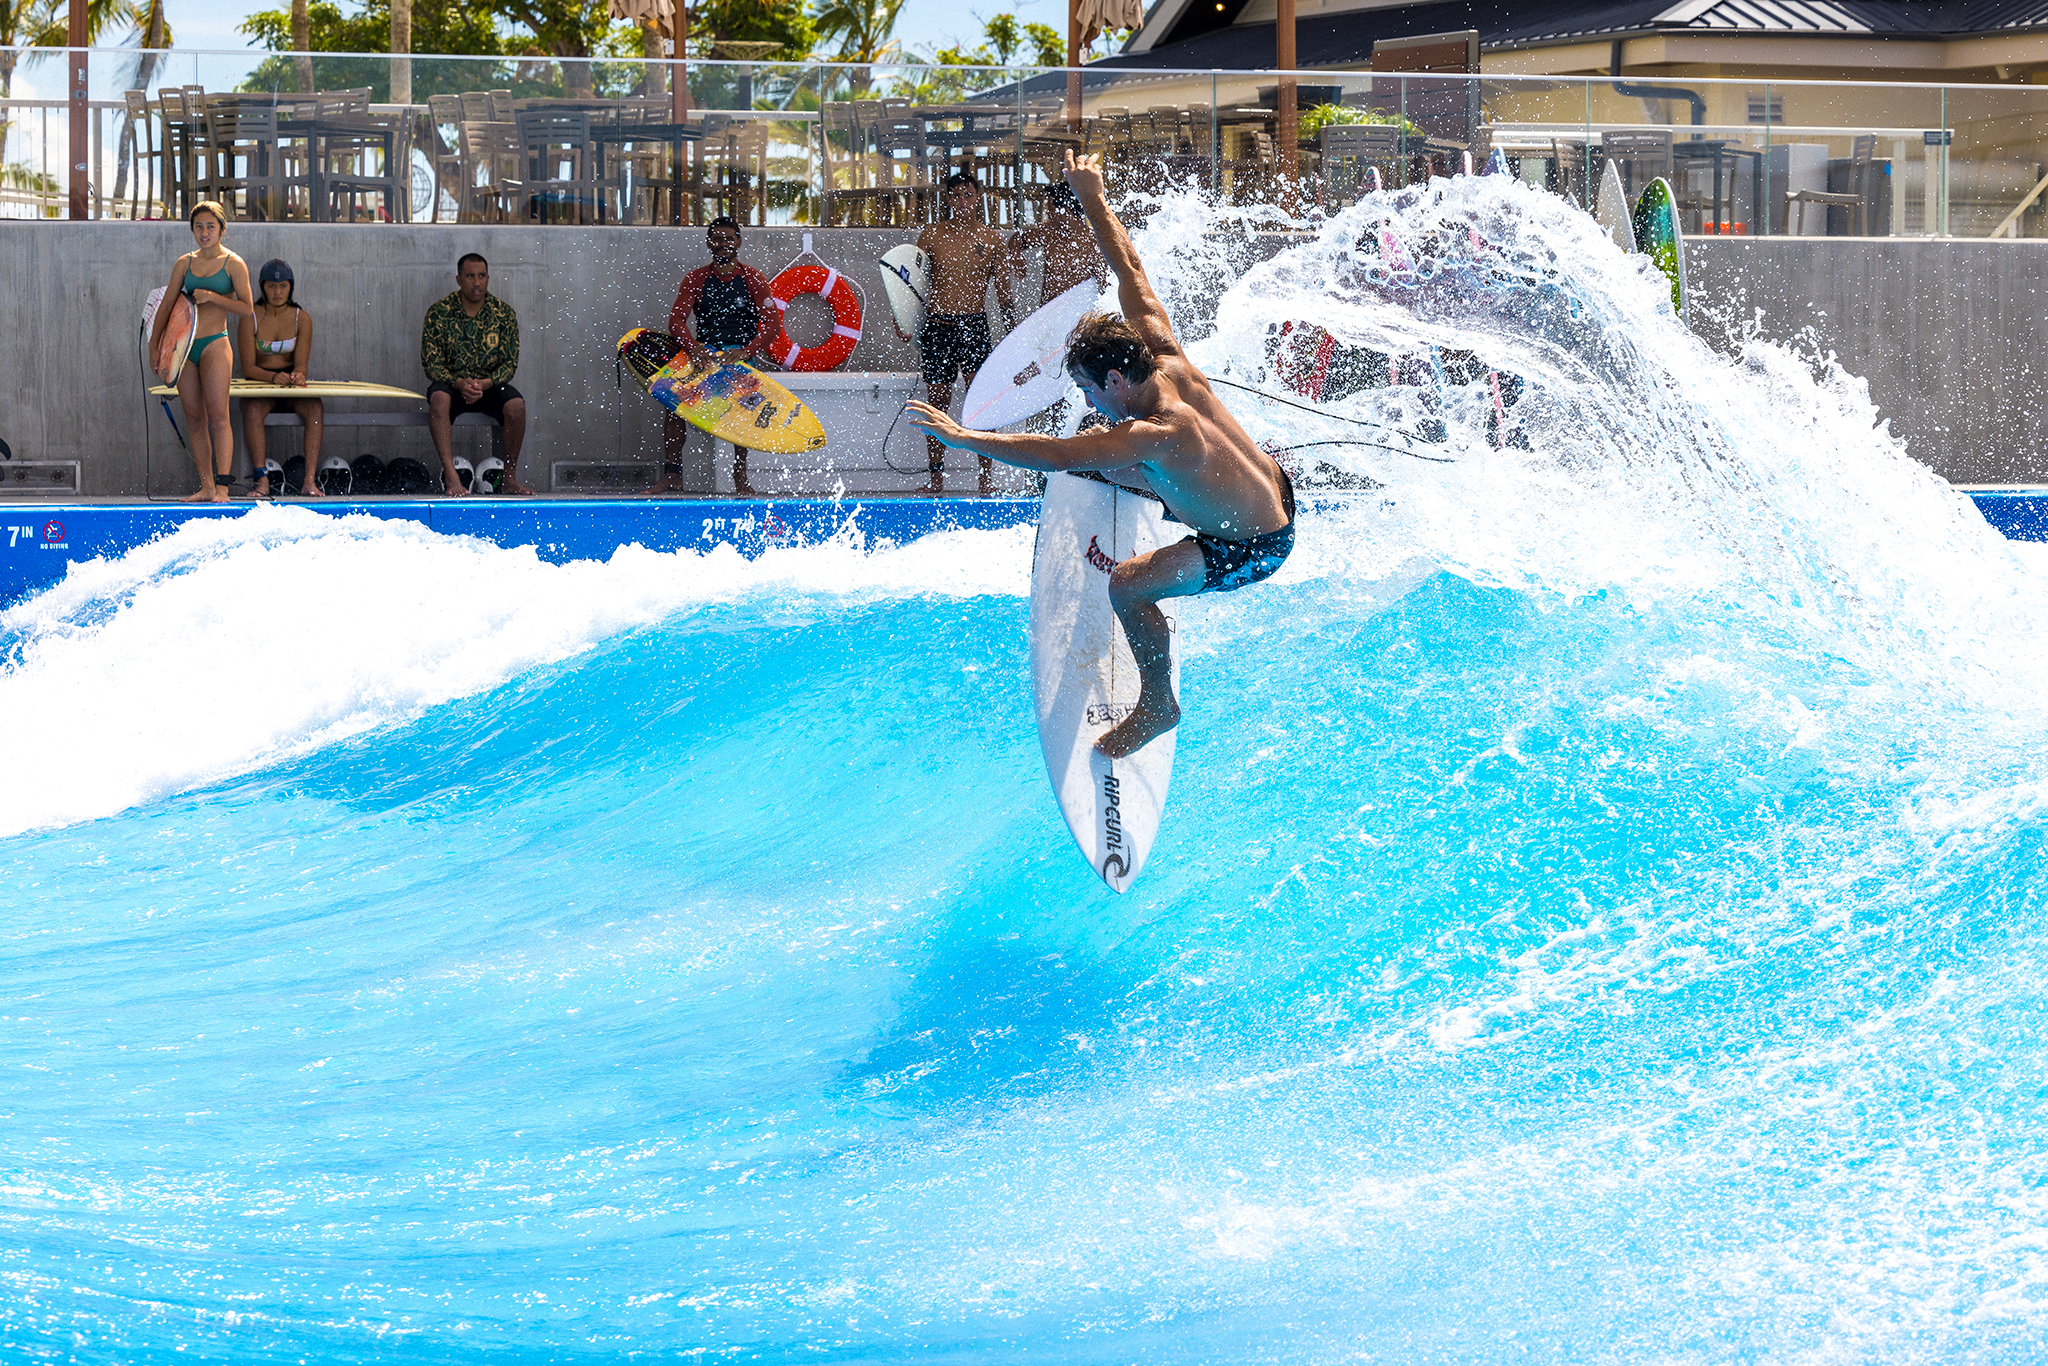 Product Learn To Surf - Wave Pool Surf Lessons